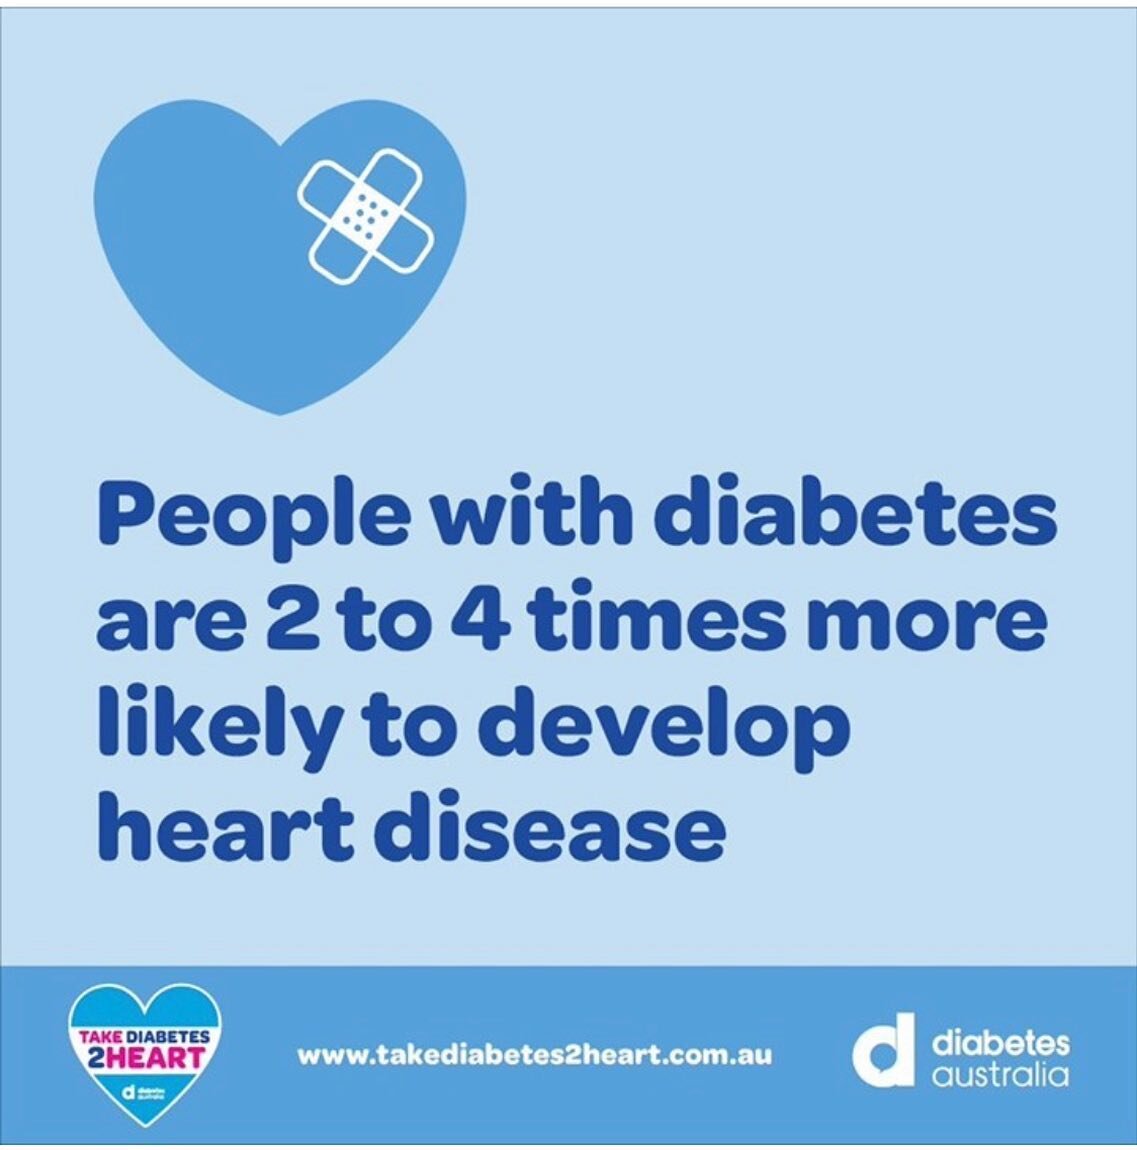 It&rsquo;s National Diabetes Week!!

Did you know that diabetes is the fastest growing chronic disease in Australia? To date there is over 1.8 million Australian&rsquo;s living with this condition. What is often not widely discussed is the serious lo